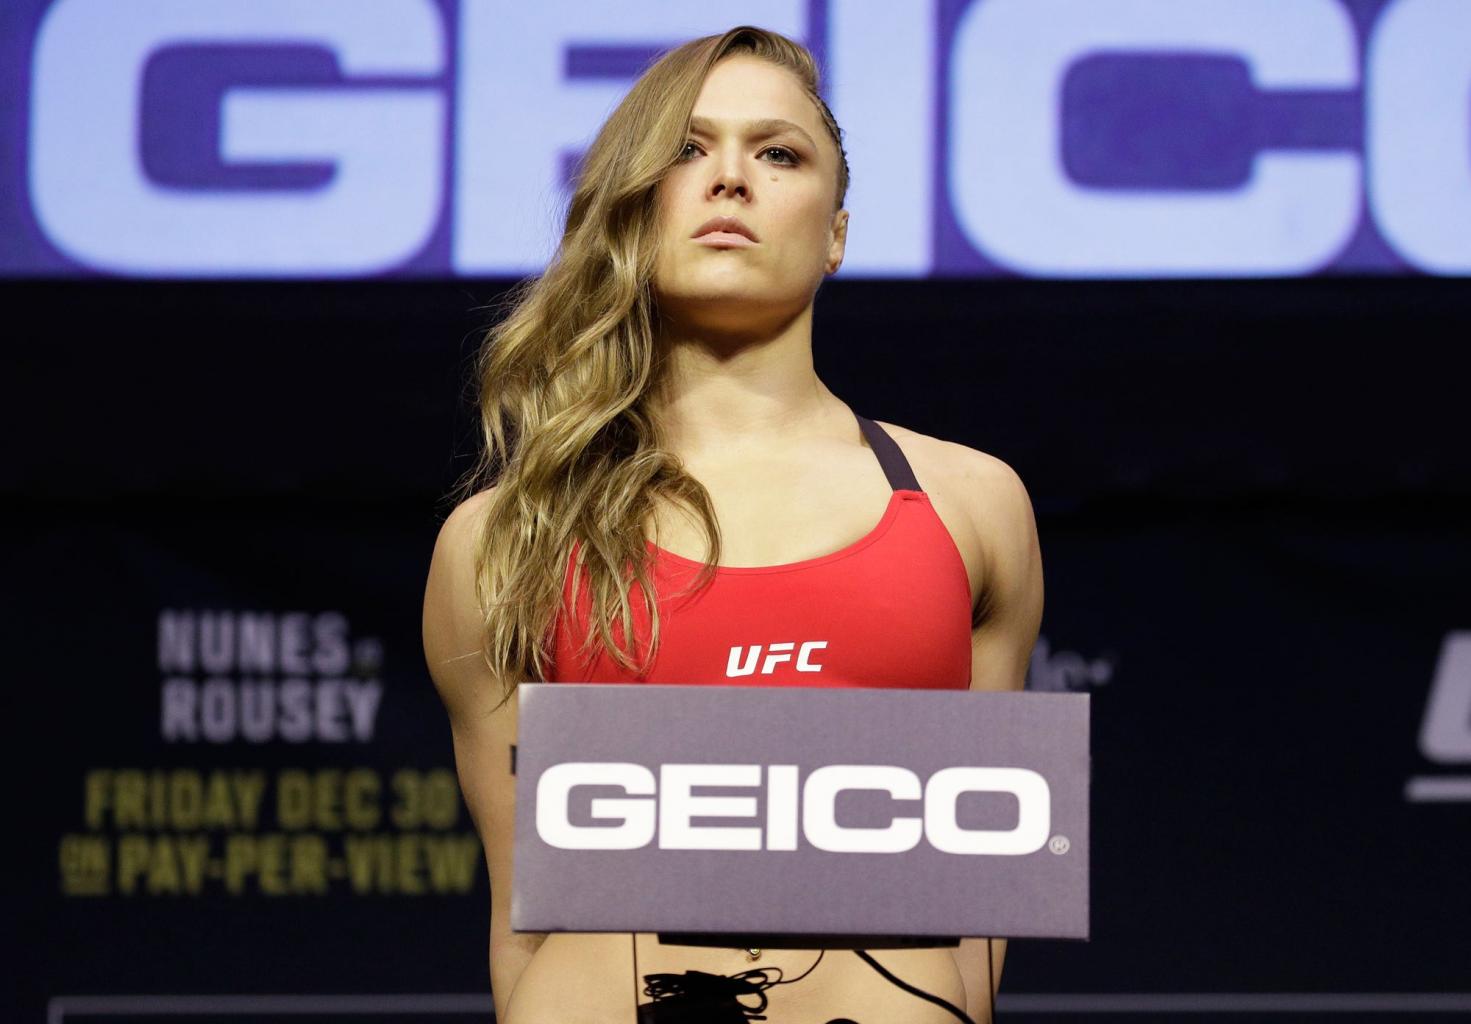 Ronda Rousey Breaks Social Media Silence Following Ufc Loss to Share Inspirational J.K. Rowling Quote